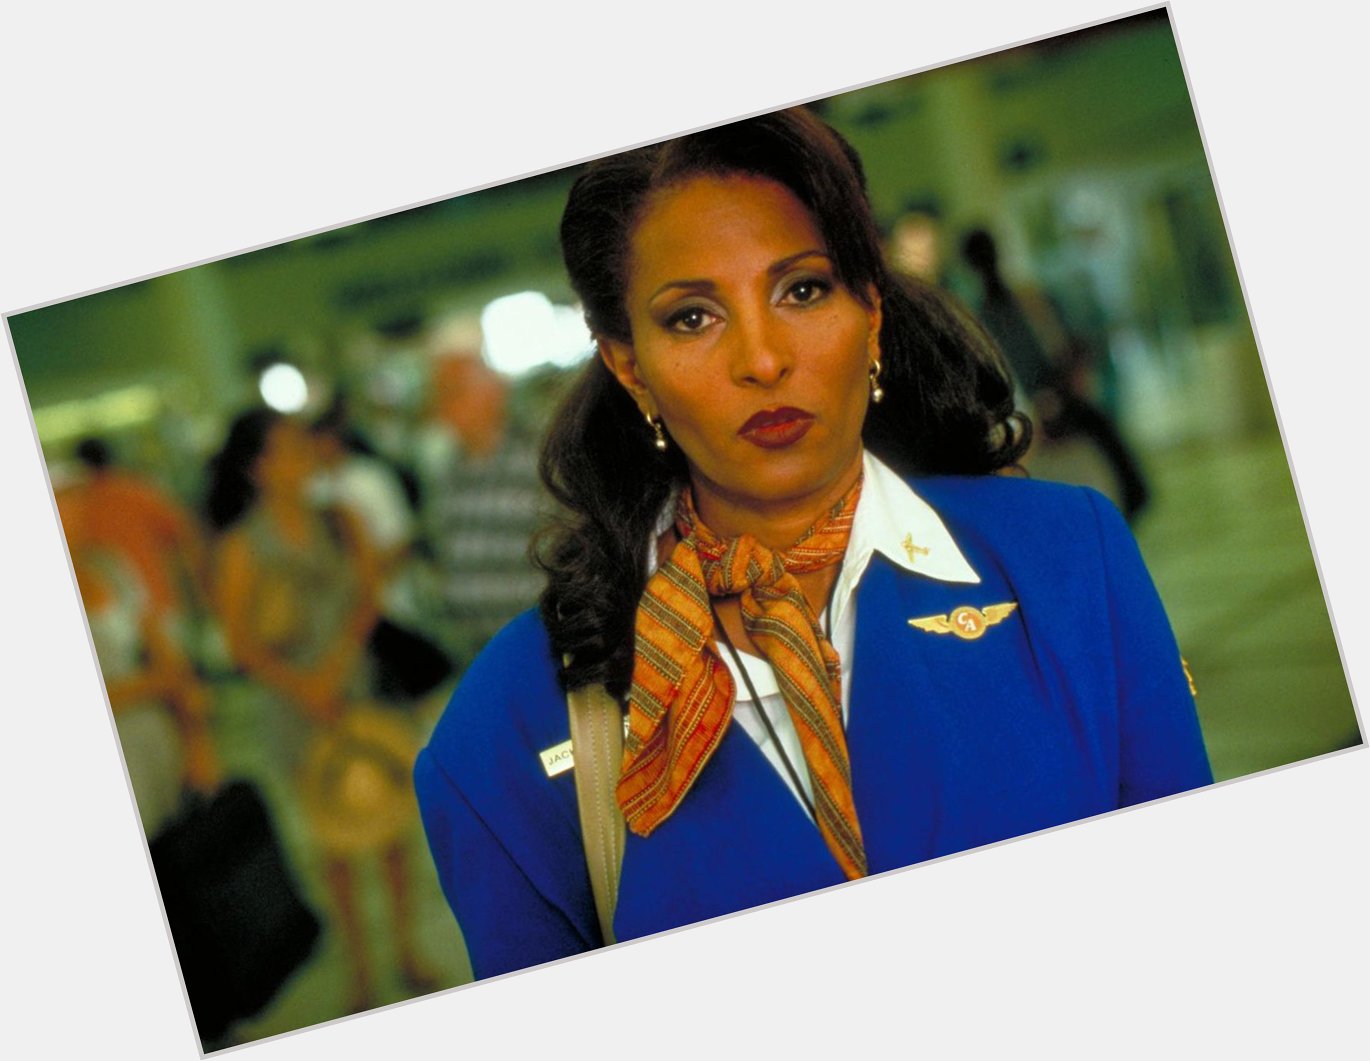 Happy Birthday Pam Grier.  Jackie Brown has one of the best opening sequences ever. 